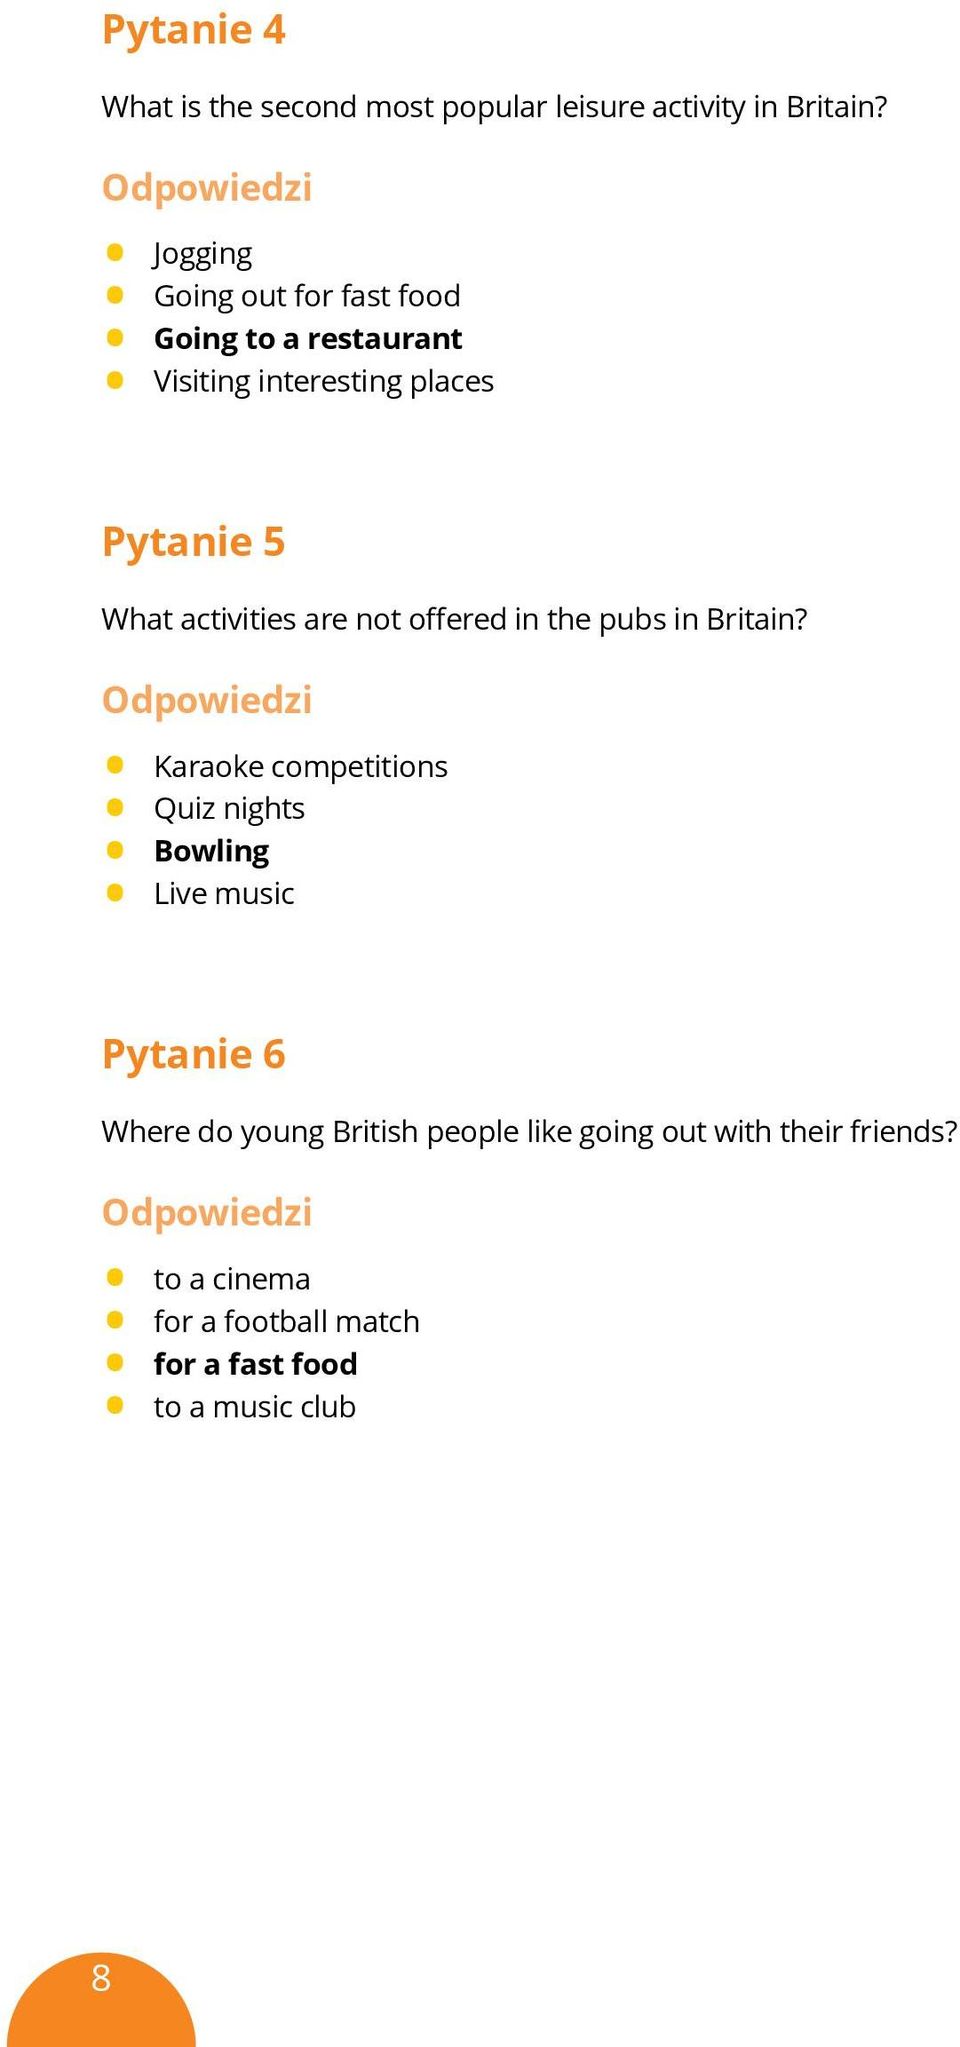 activities are not offered in the pubs in Britain?